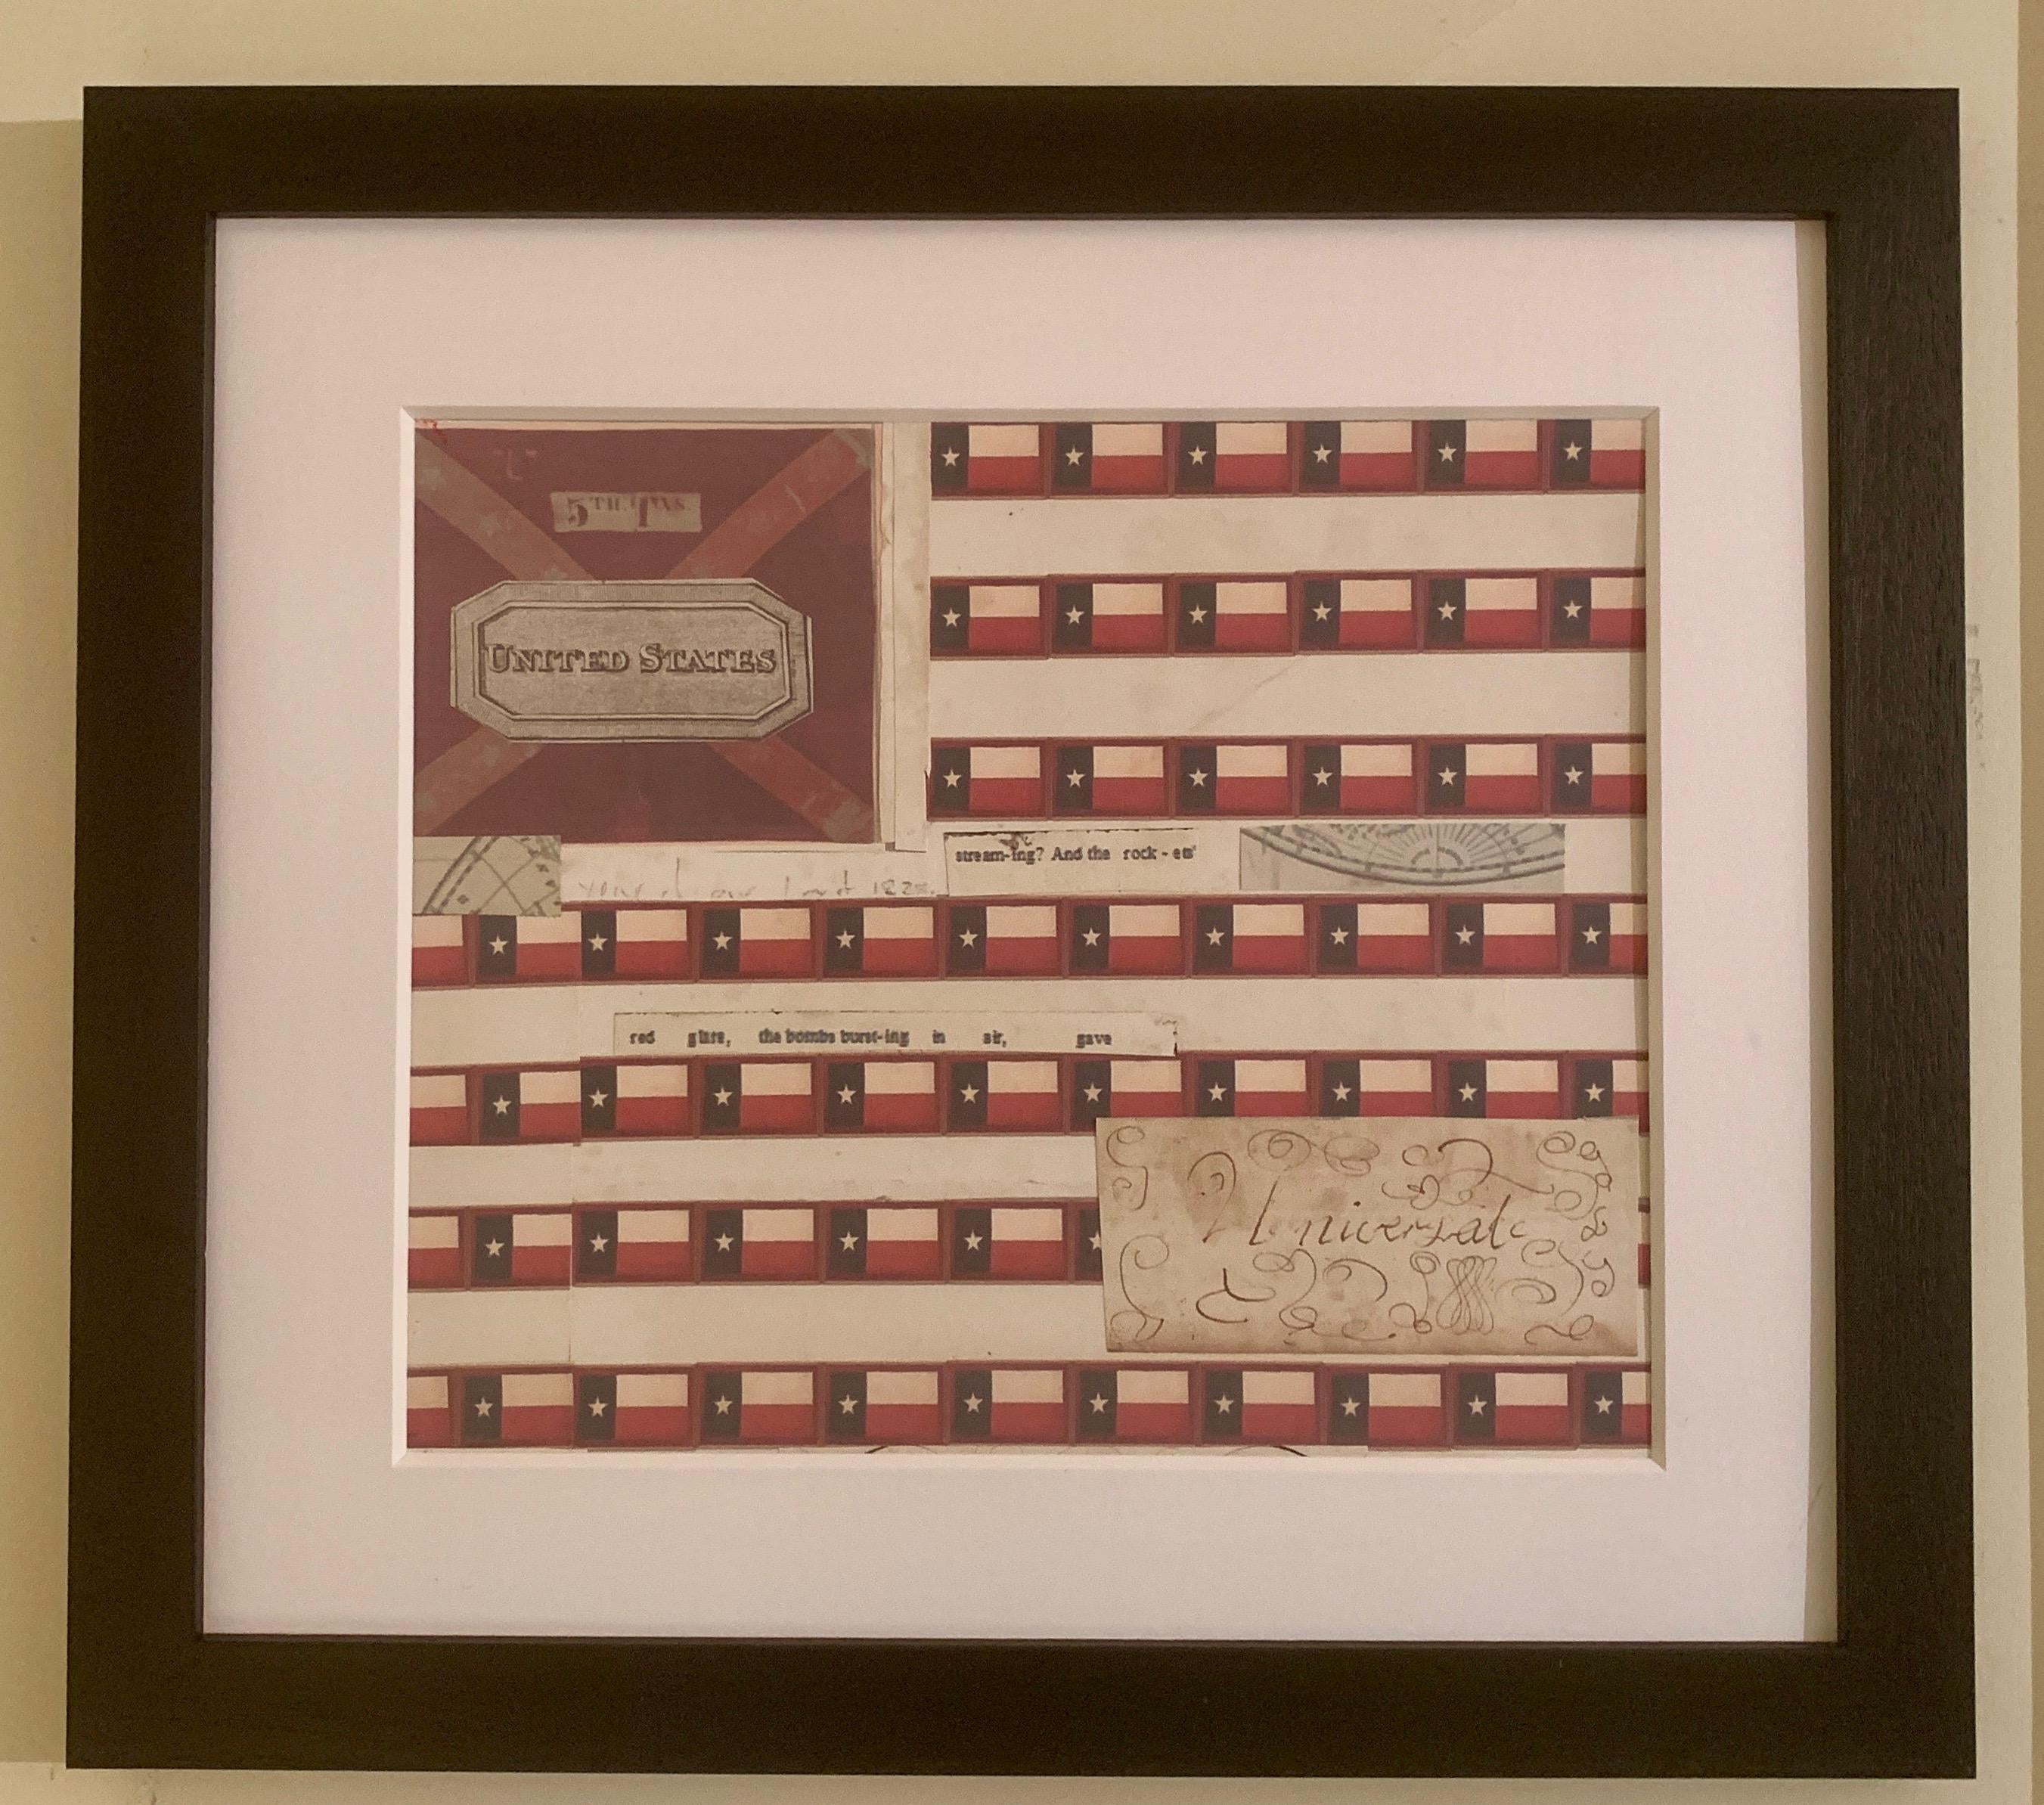 American flag collage with colored prints of the Texas flag and original ink